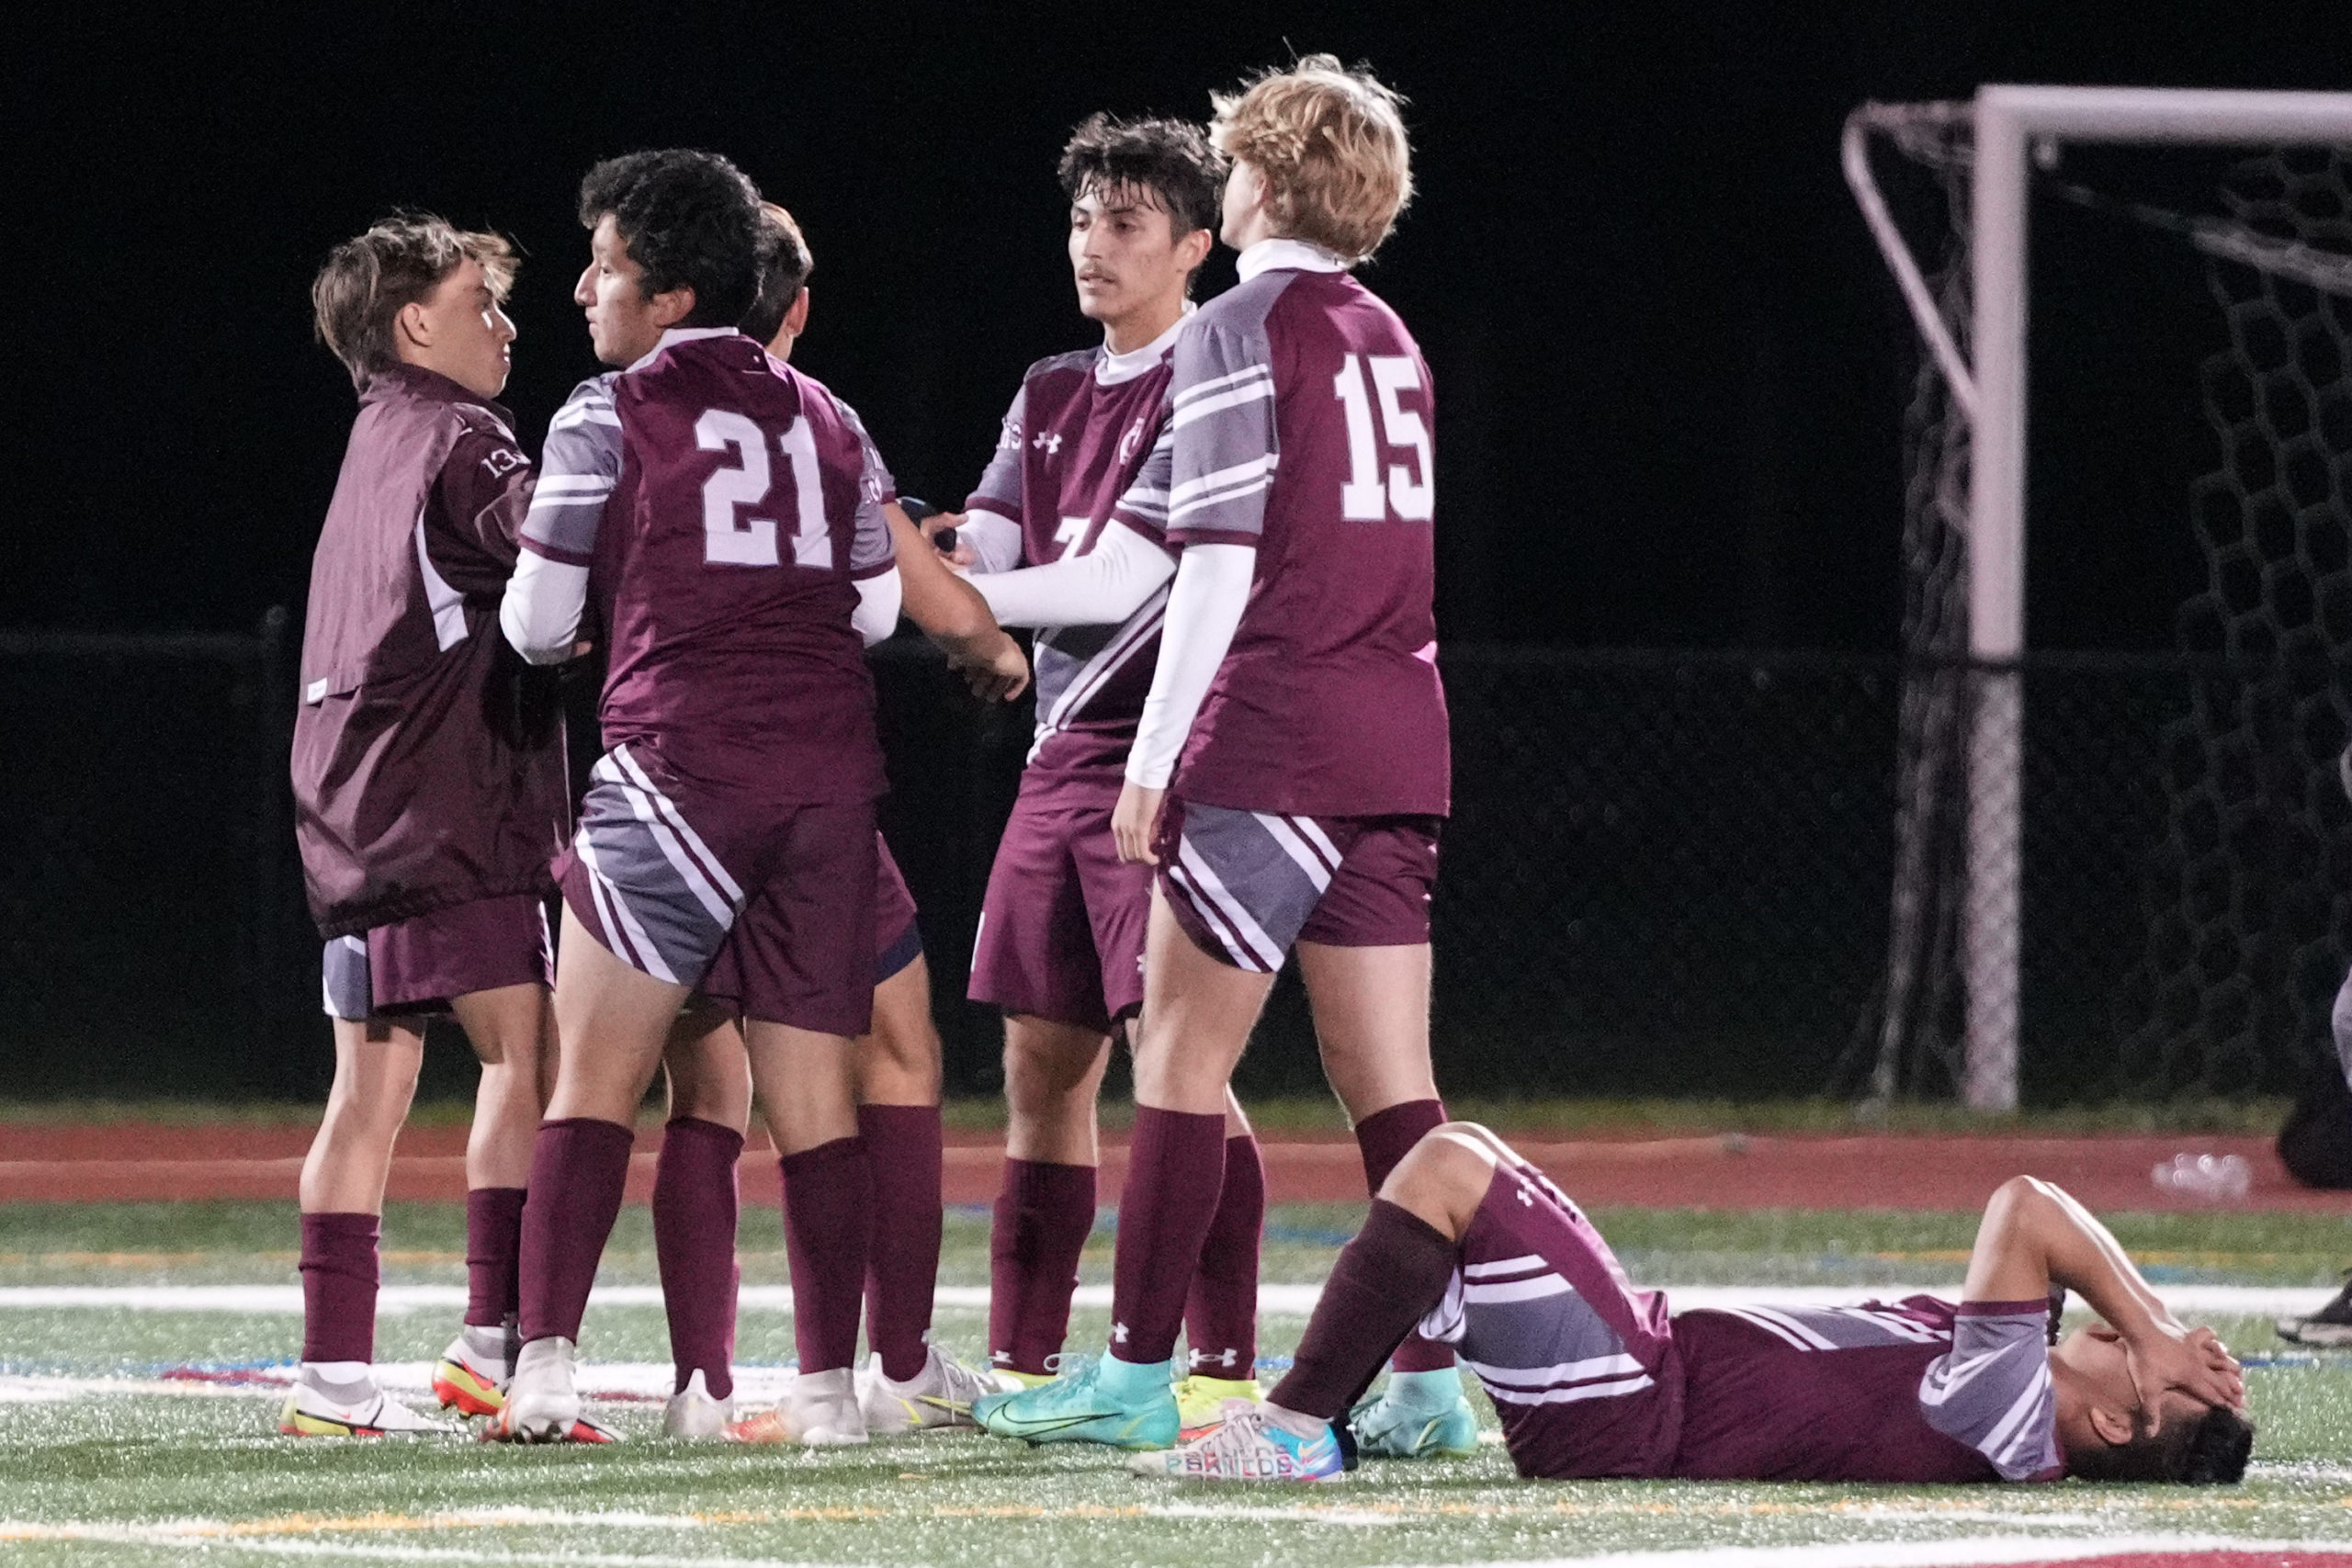 The Mariners lost in a shootout, 6-5, to Mattituck in the Suffolk County Class B semifinals on Thursday, October 28.